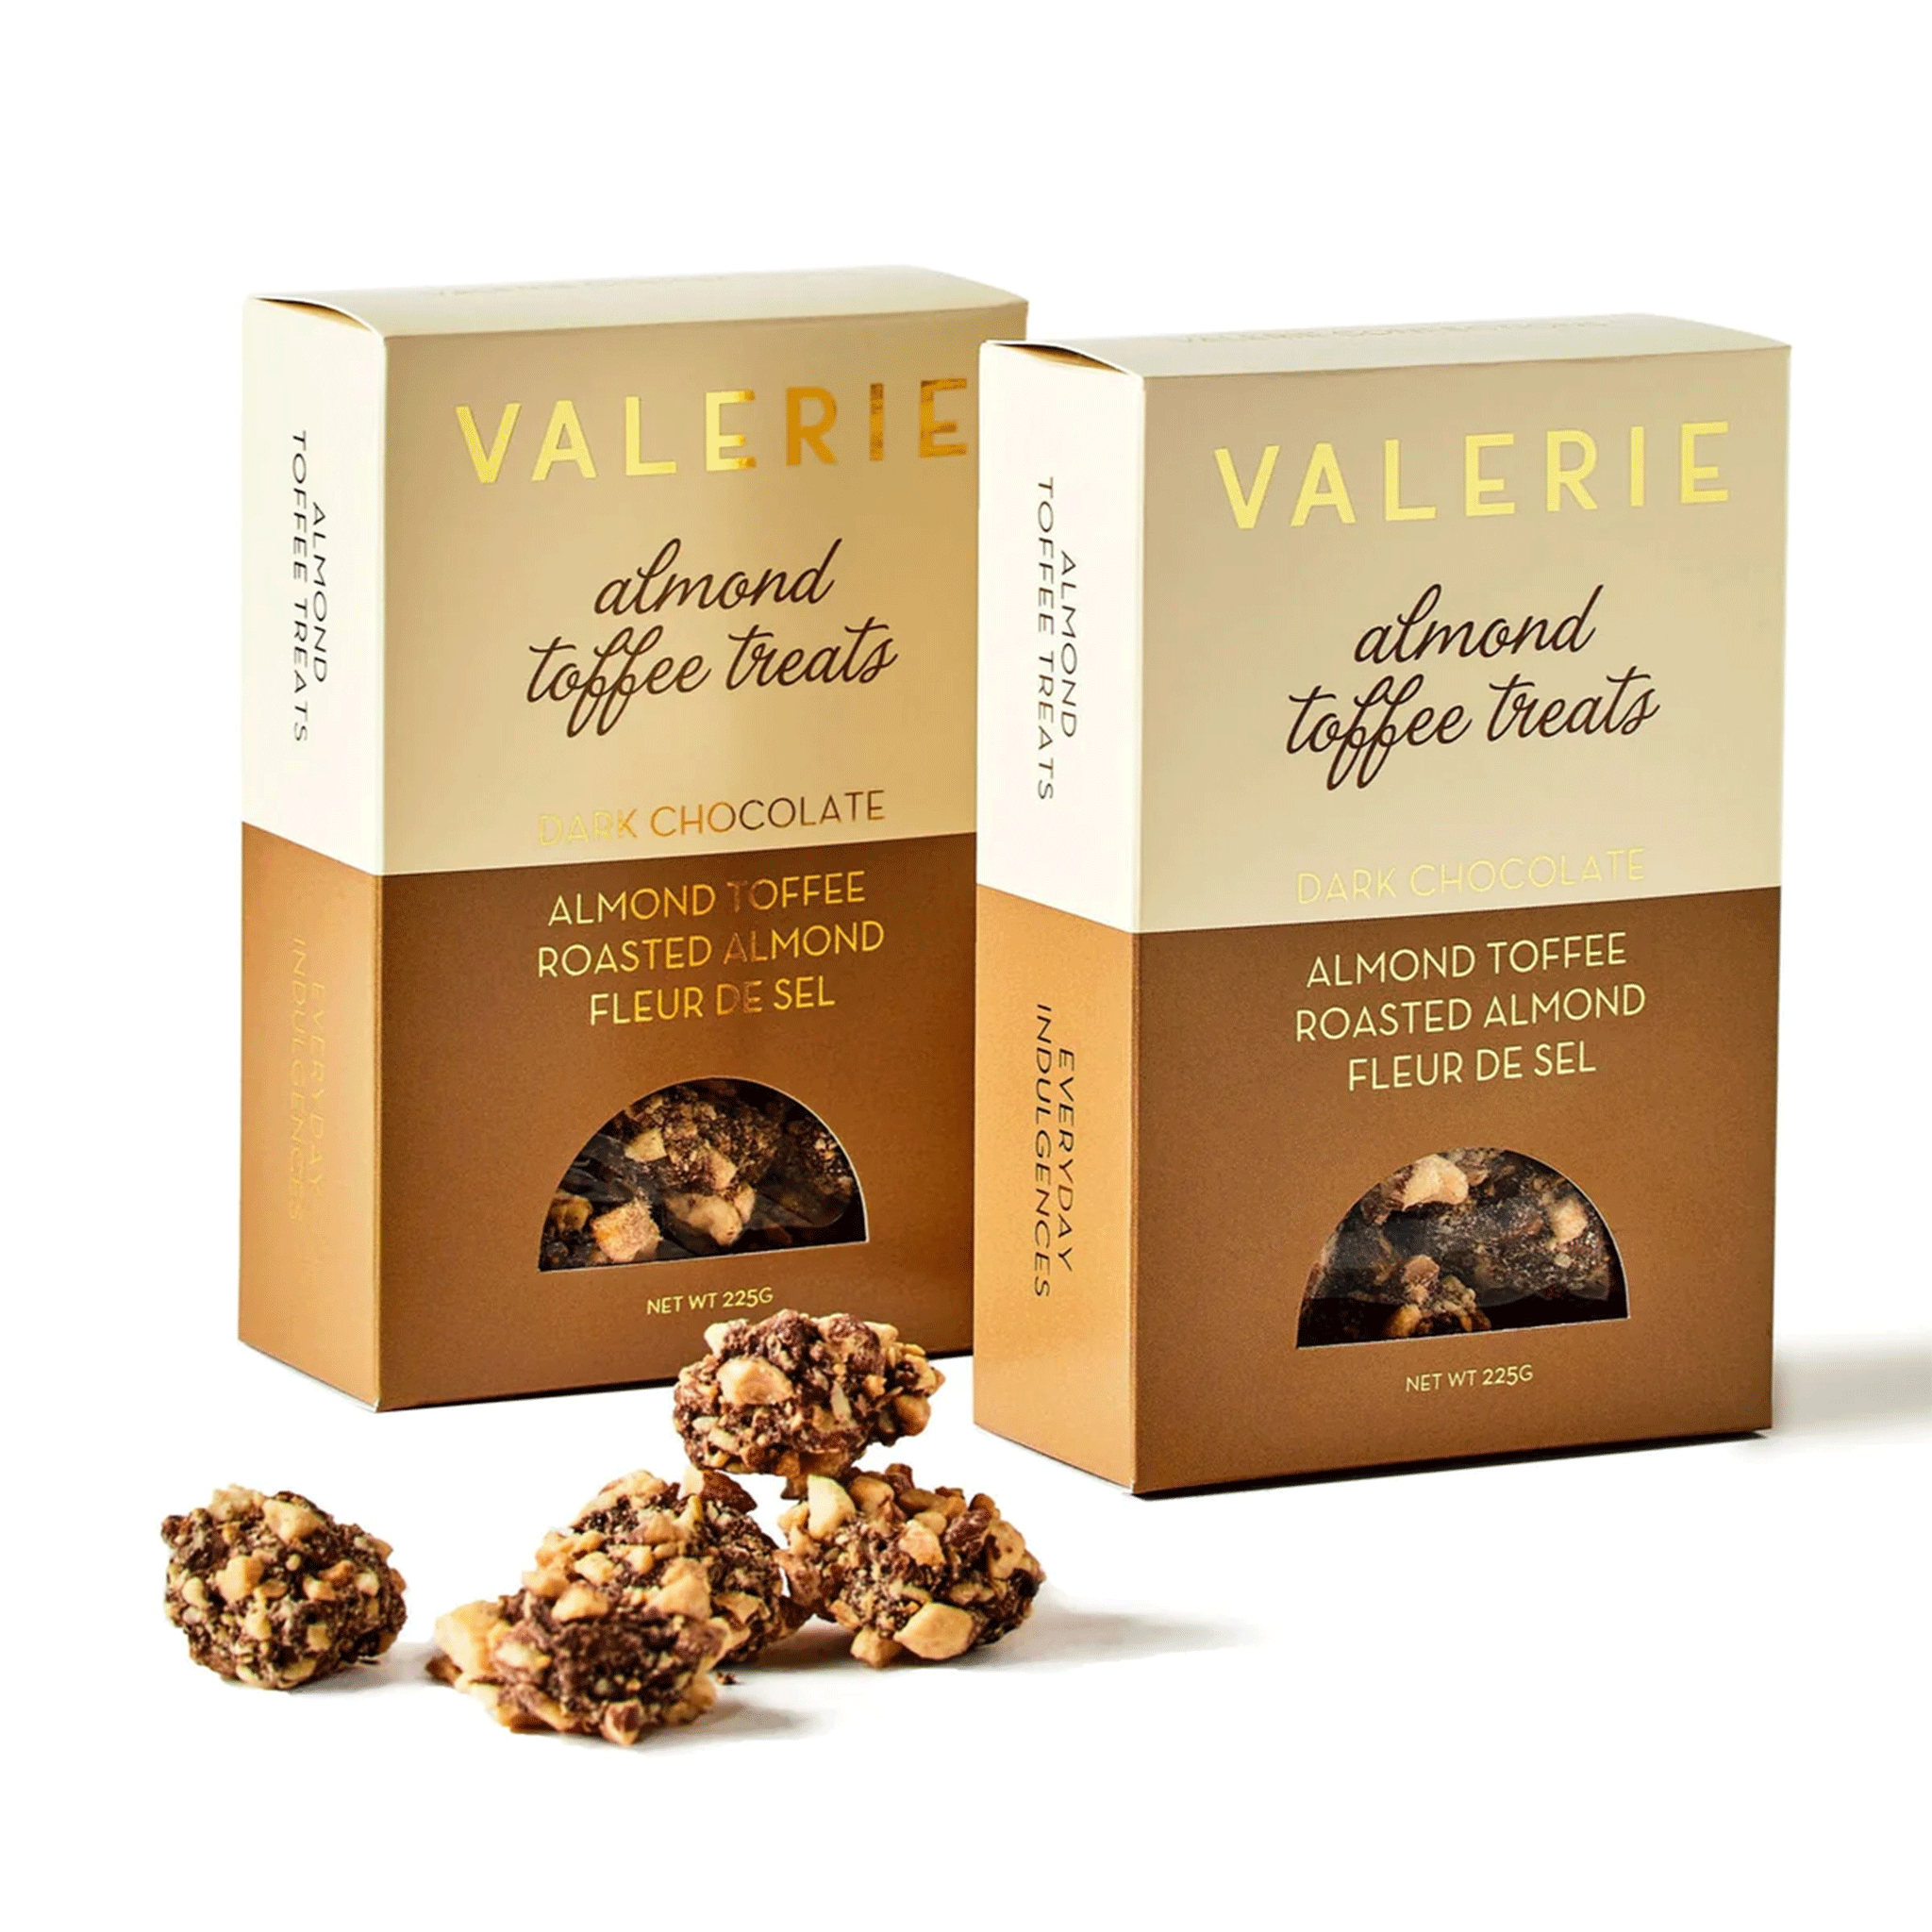 On a white background is two boxes of Almond Toffee Treats with gold text on the front of the box. The toffee treats are small clusters of almond, chocolate and toffee bits. 